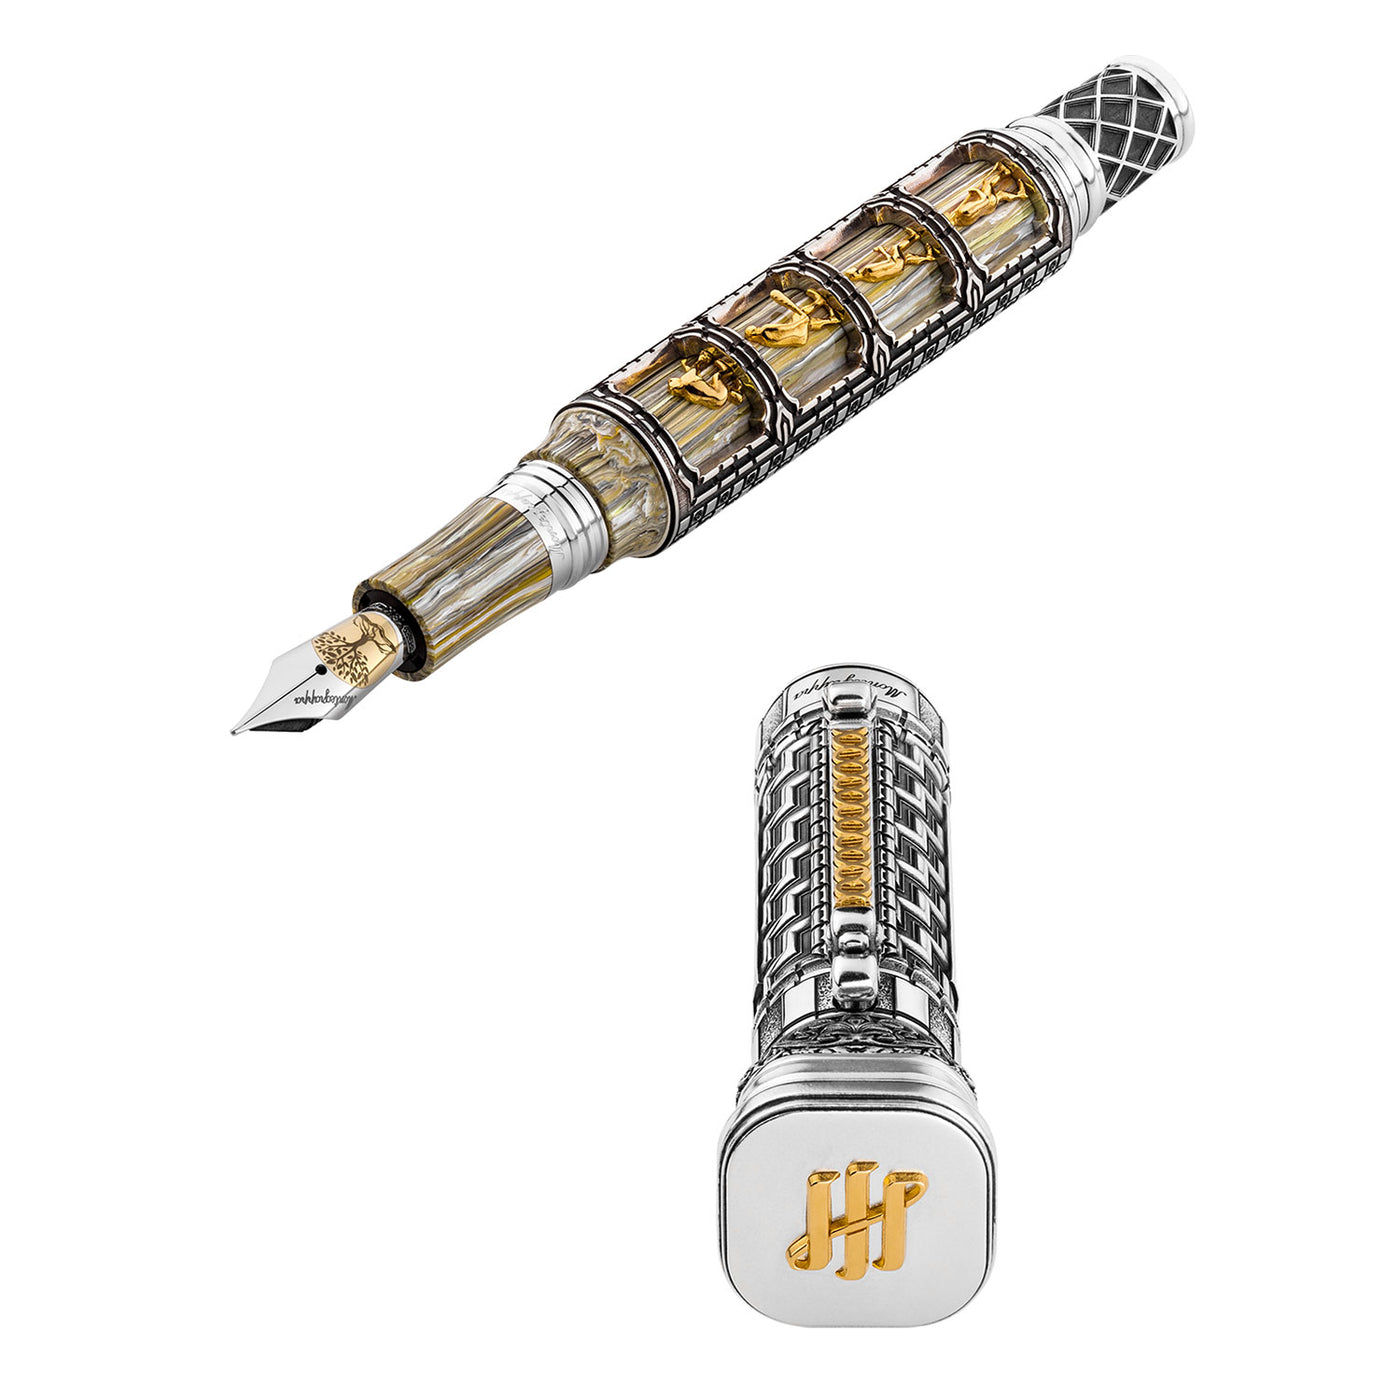 Montegrappa Theory of Evolution Fountain Pen - Avanguardia (Limited Edition) 3